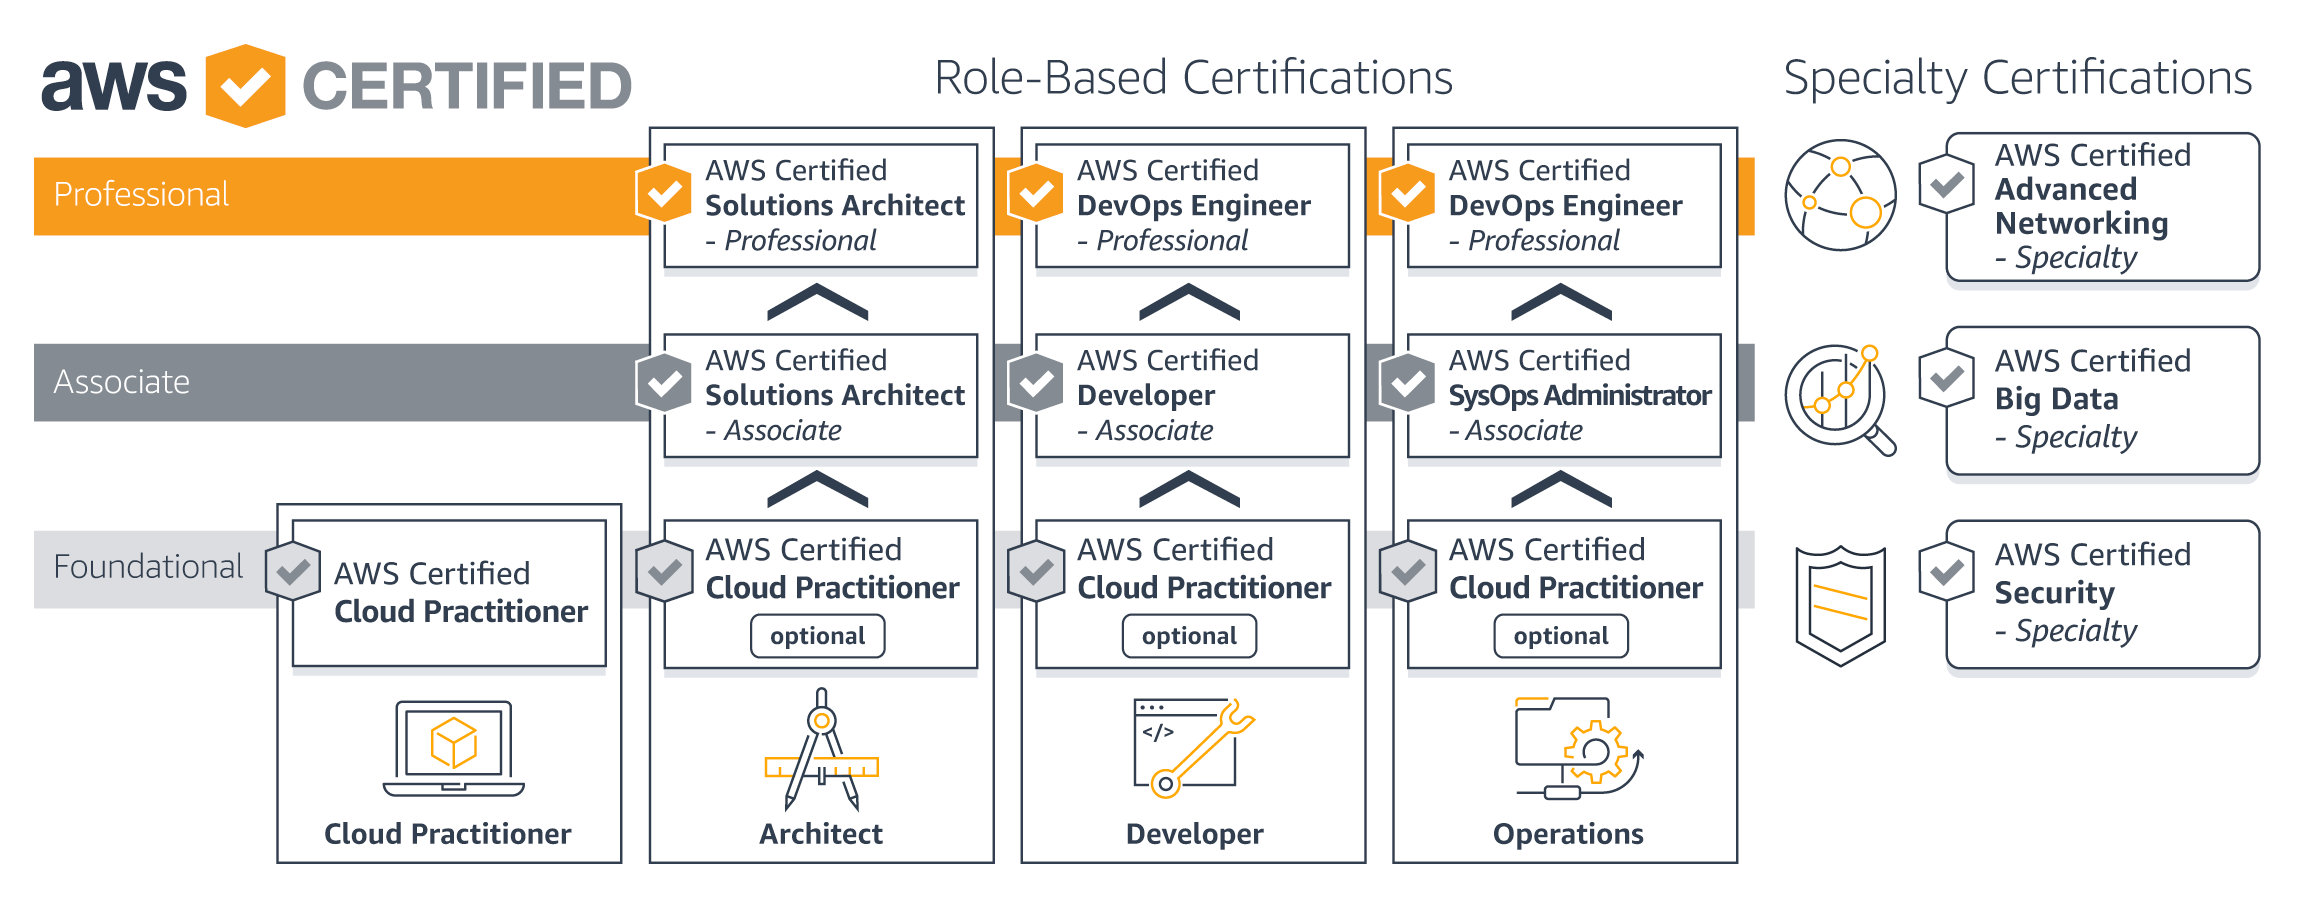 AWS Certification Path